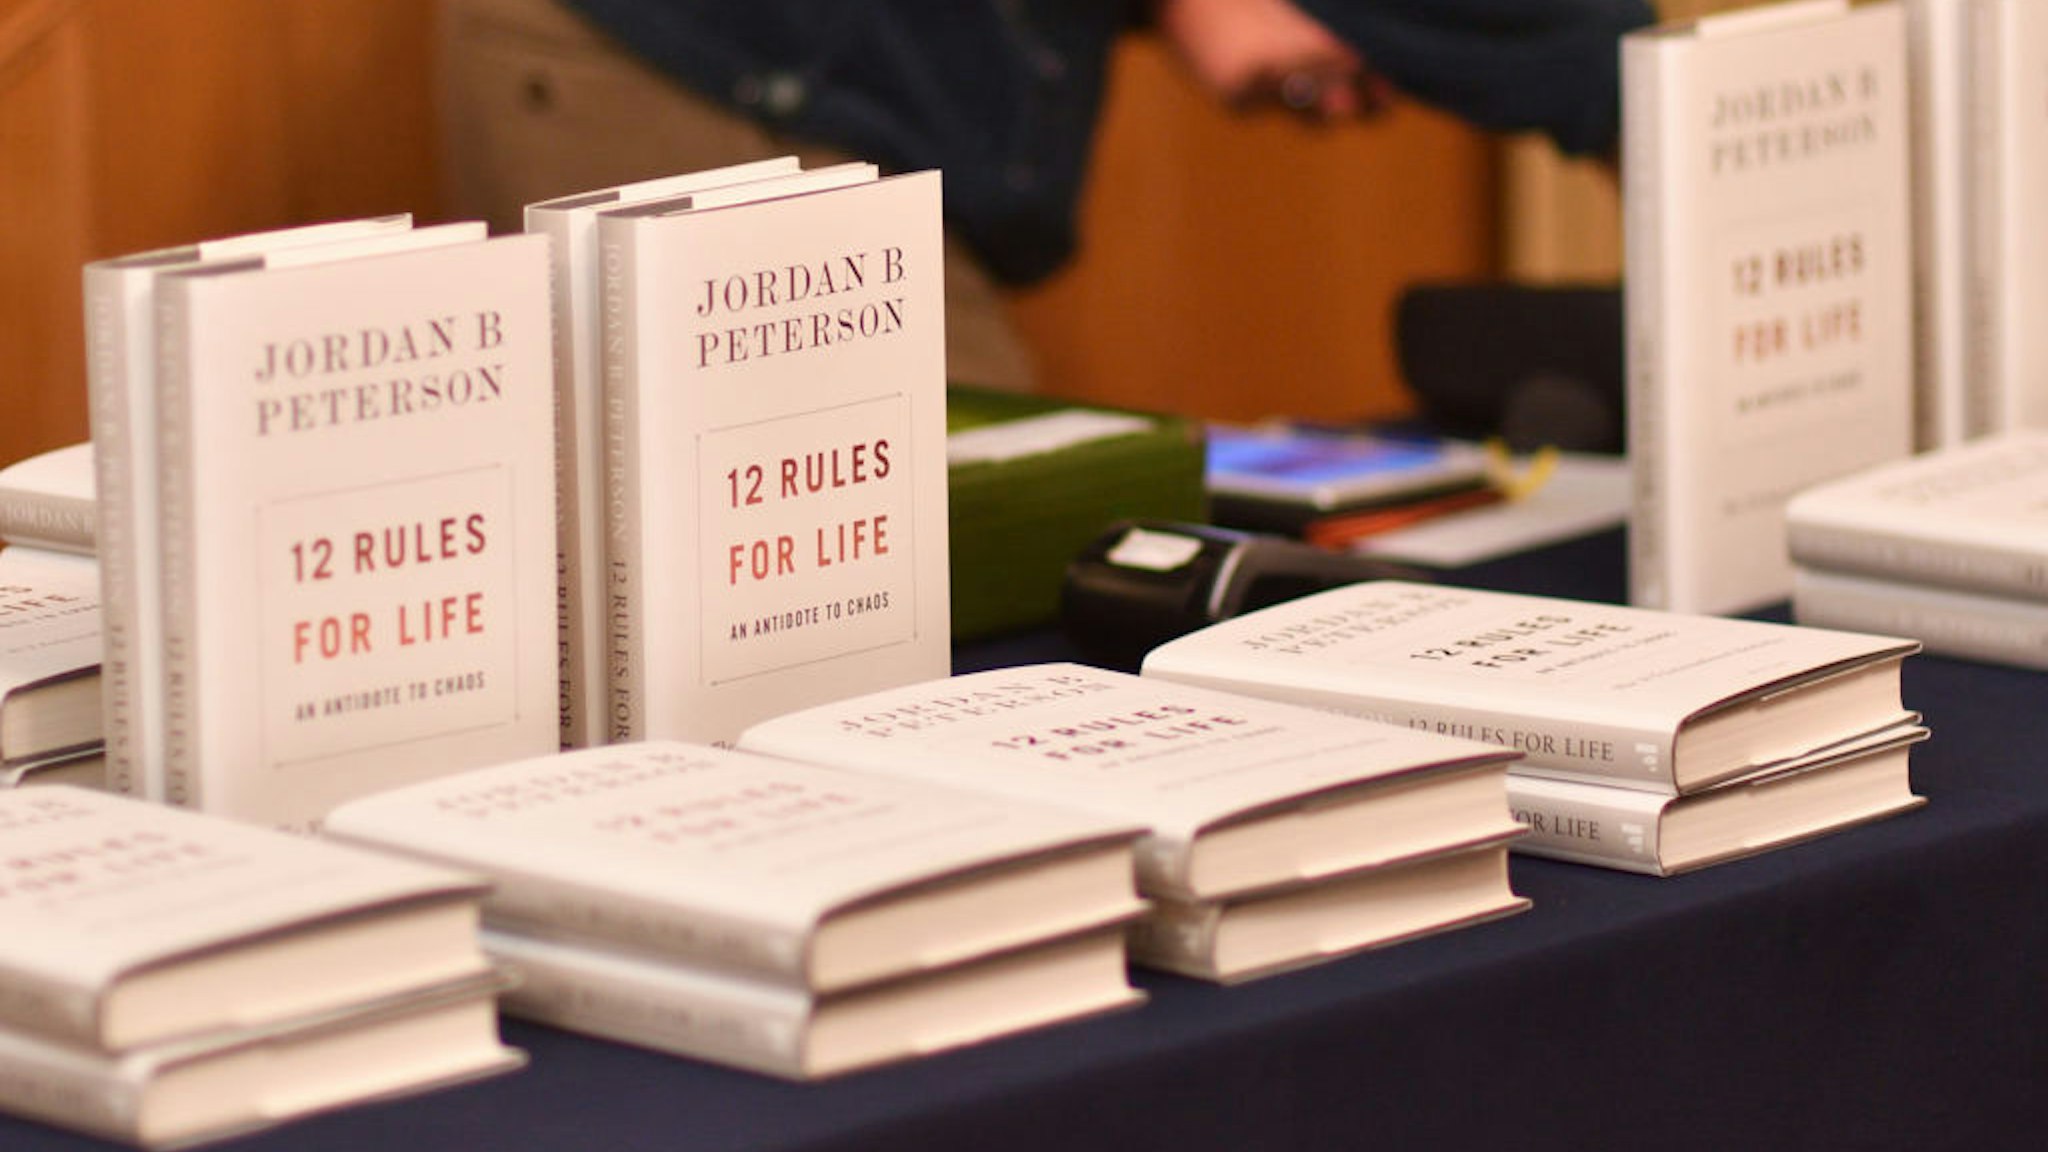 CAMBRIDGE, CAMBRIDGESHIRE - NOVEMBER 02: Jordan Peterson's book "12 rules for life" available to students as he addresses The Cambridge Union on November 02, 2018 in Cambridge, Cambridgeshire.